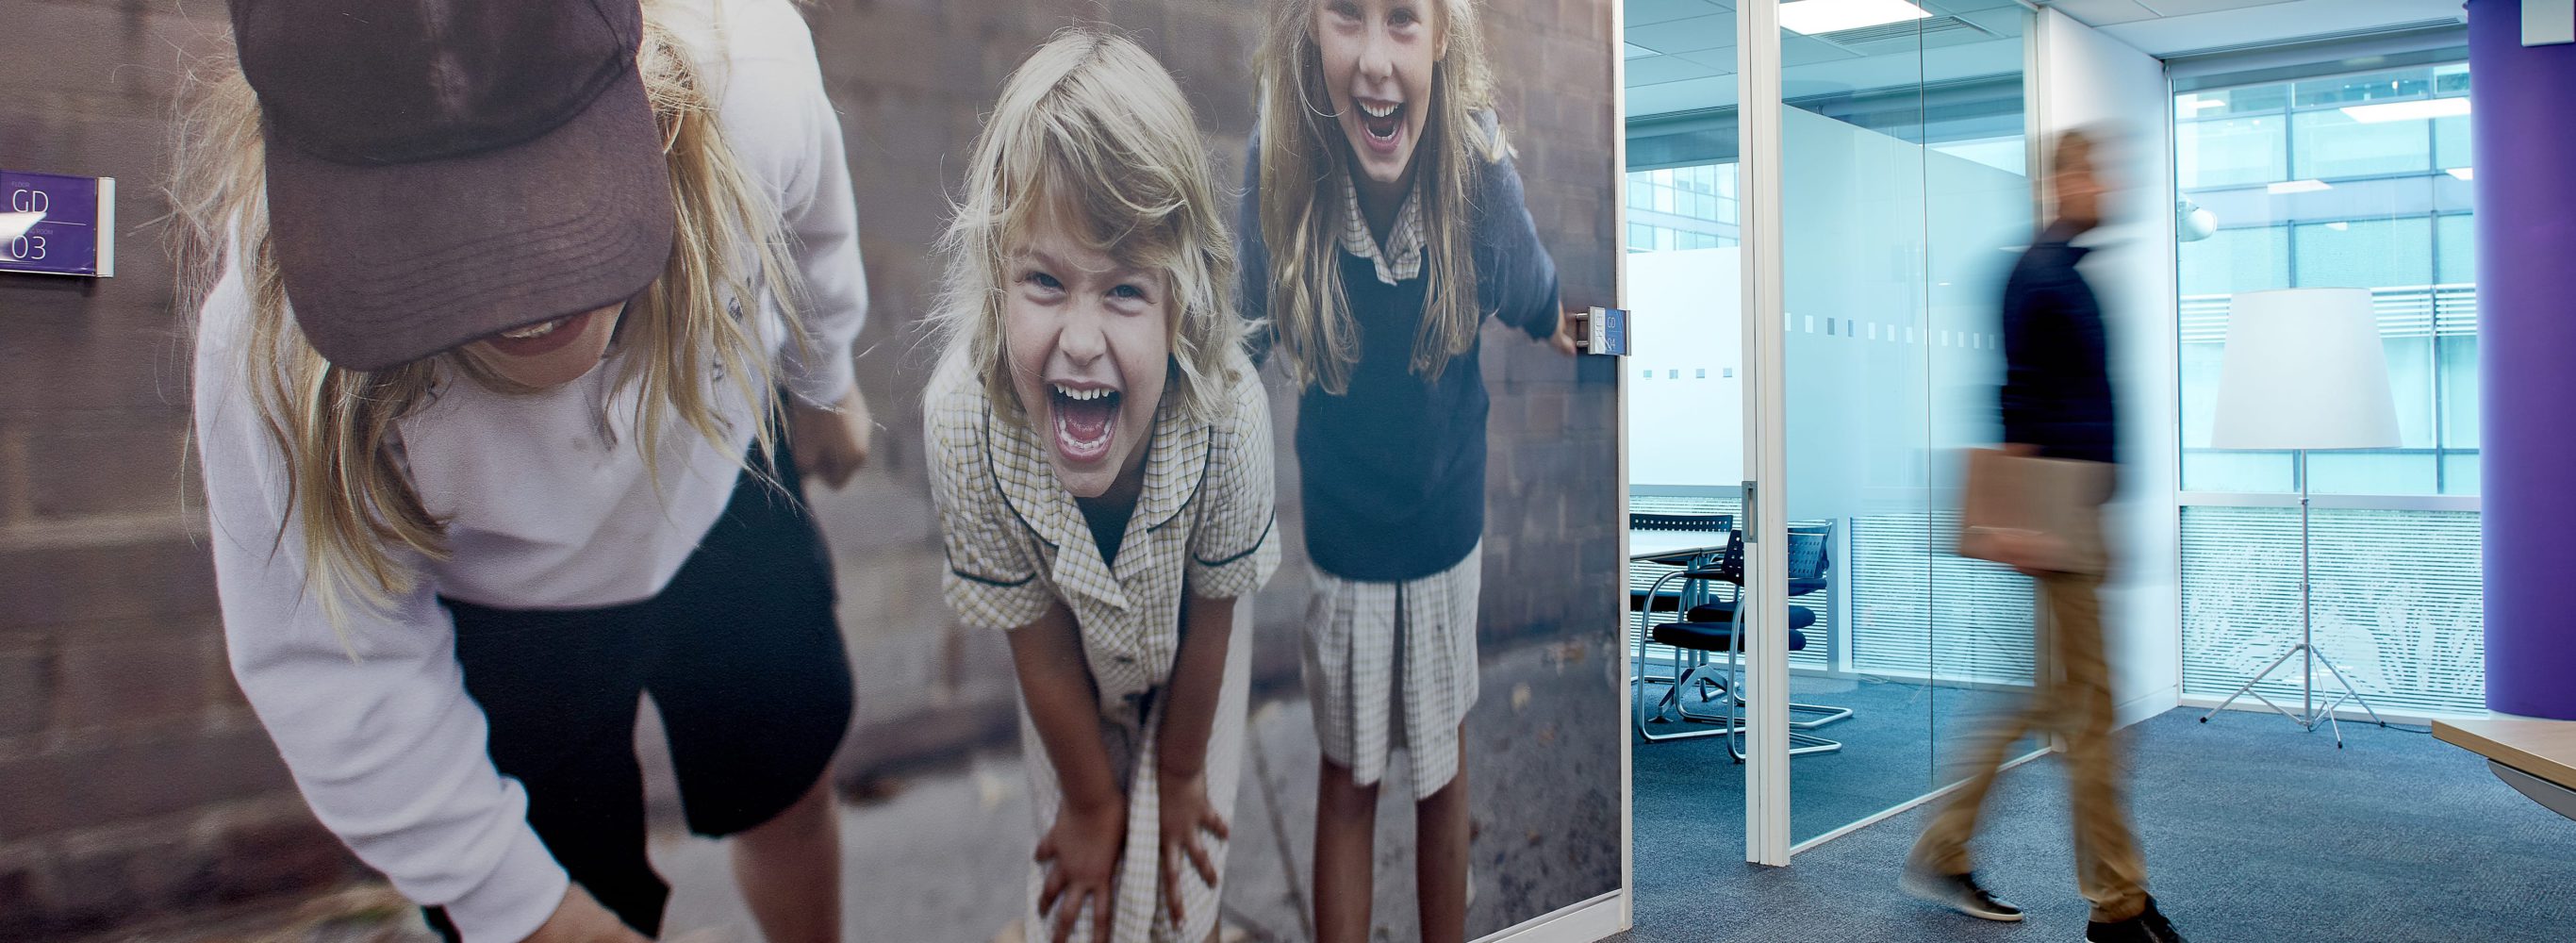 BT Branded Environments - polycryl wall graphic